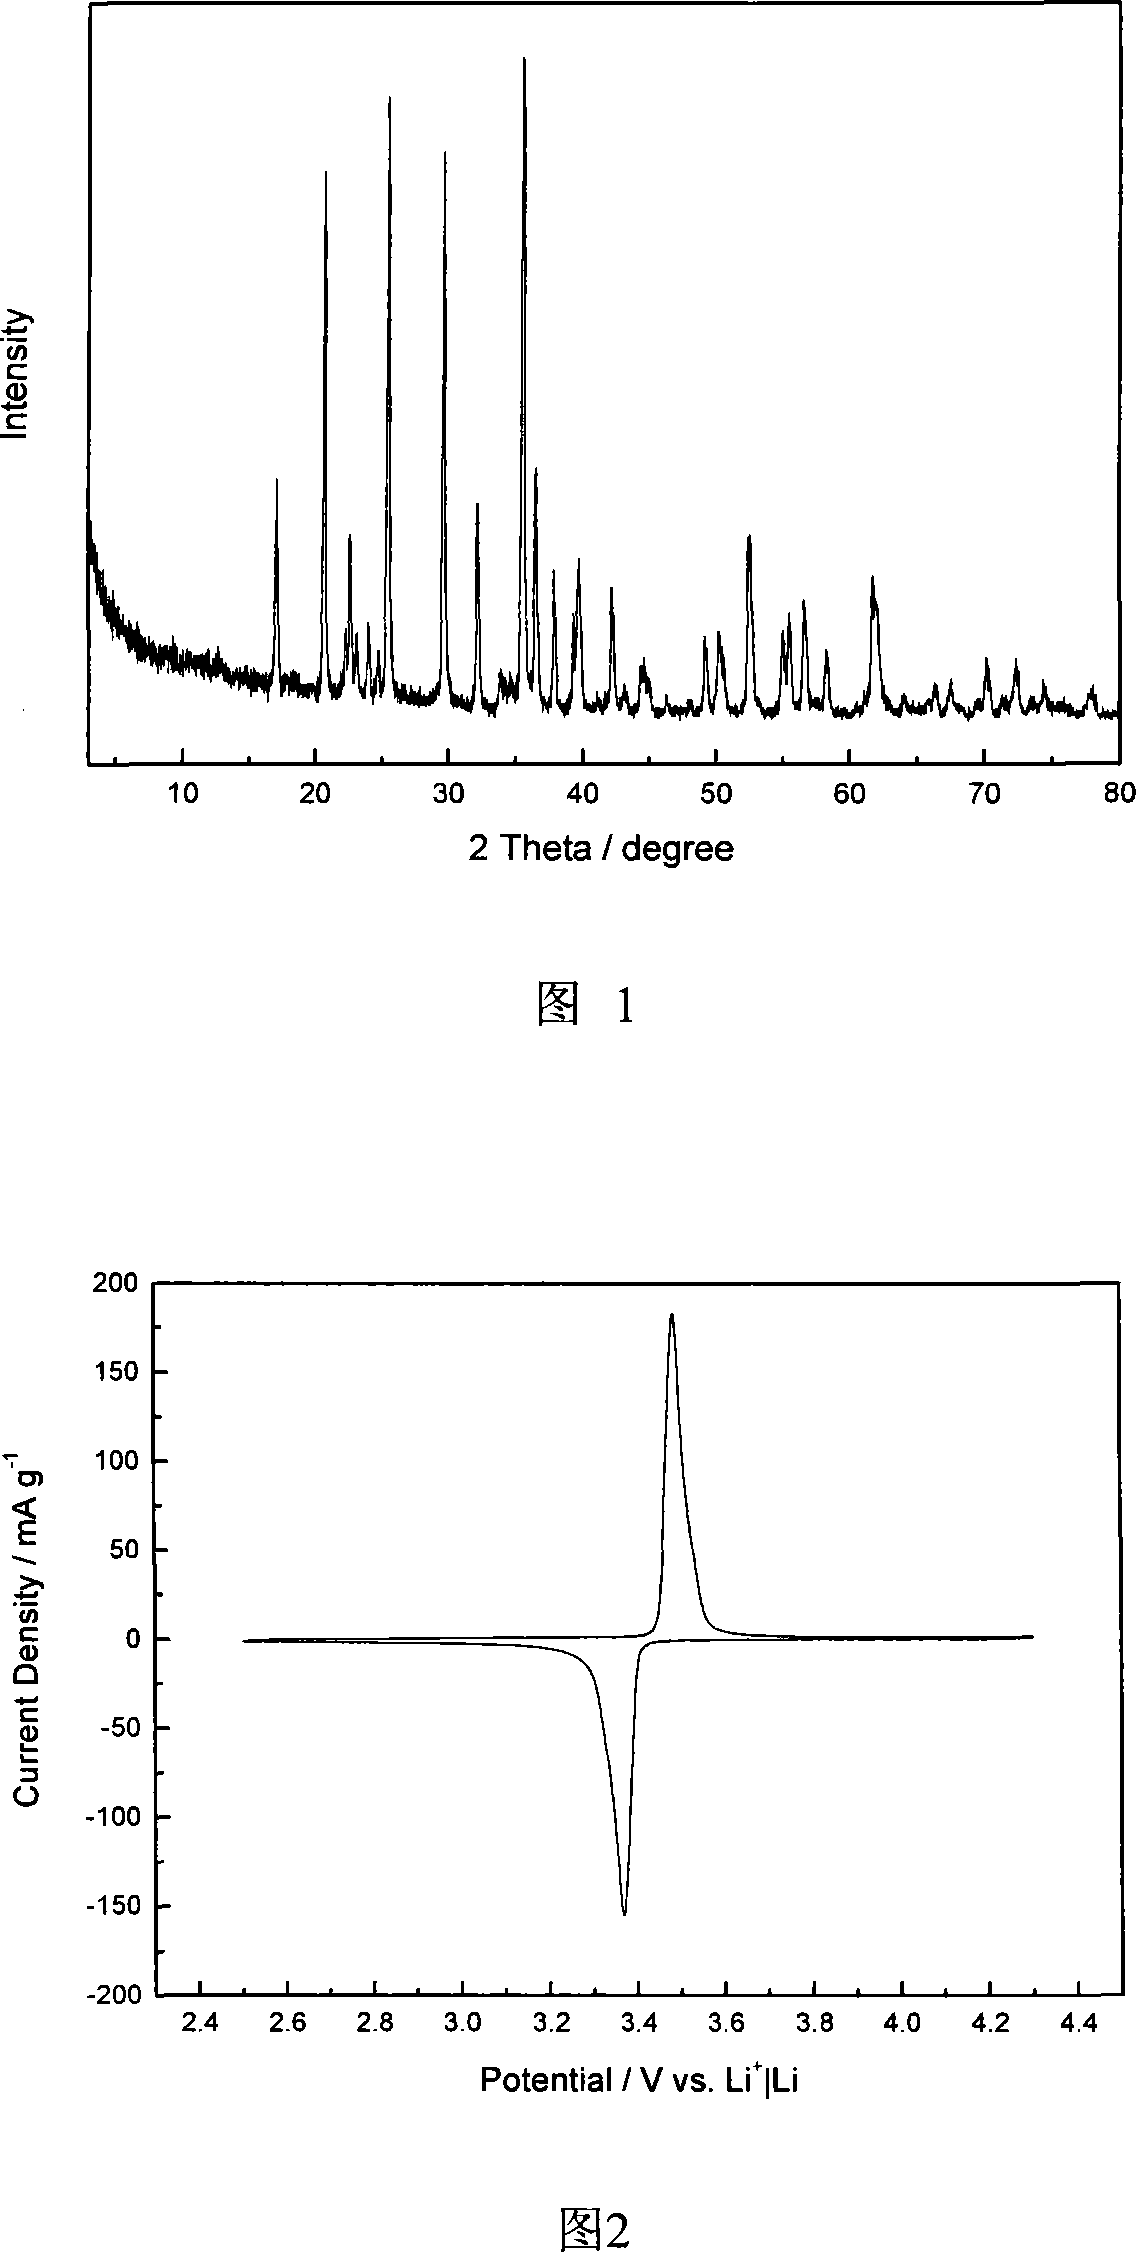 Novel conductive agent doping/coating lithium iron phosphate material and its production method